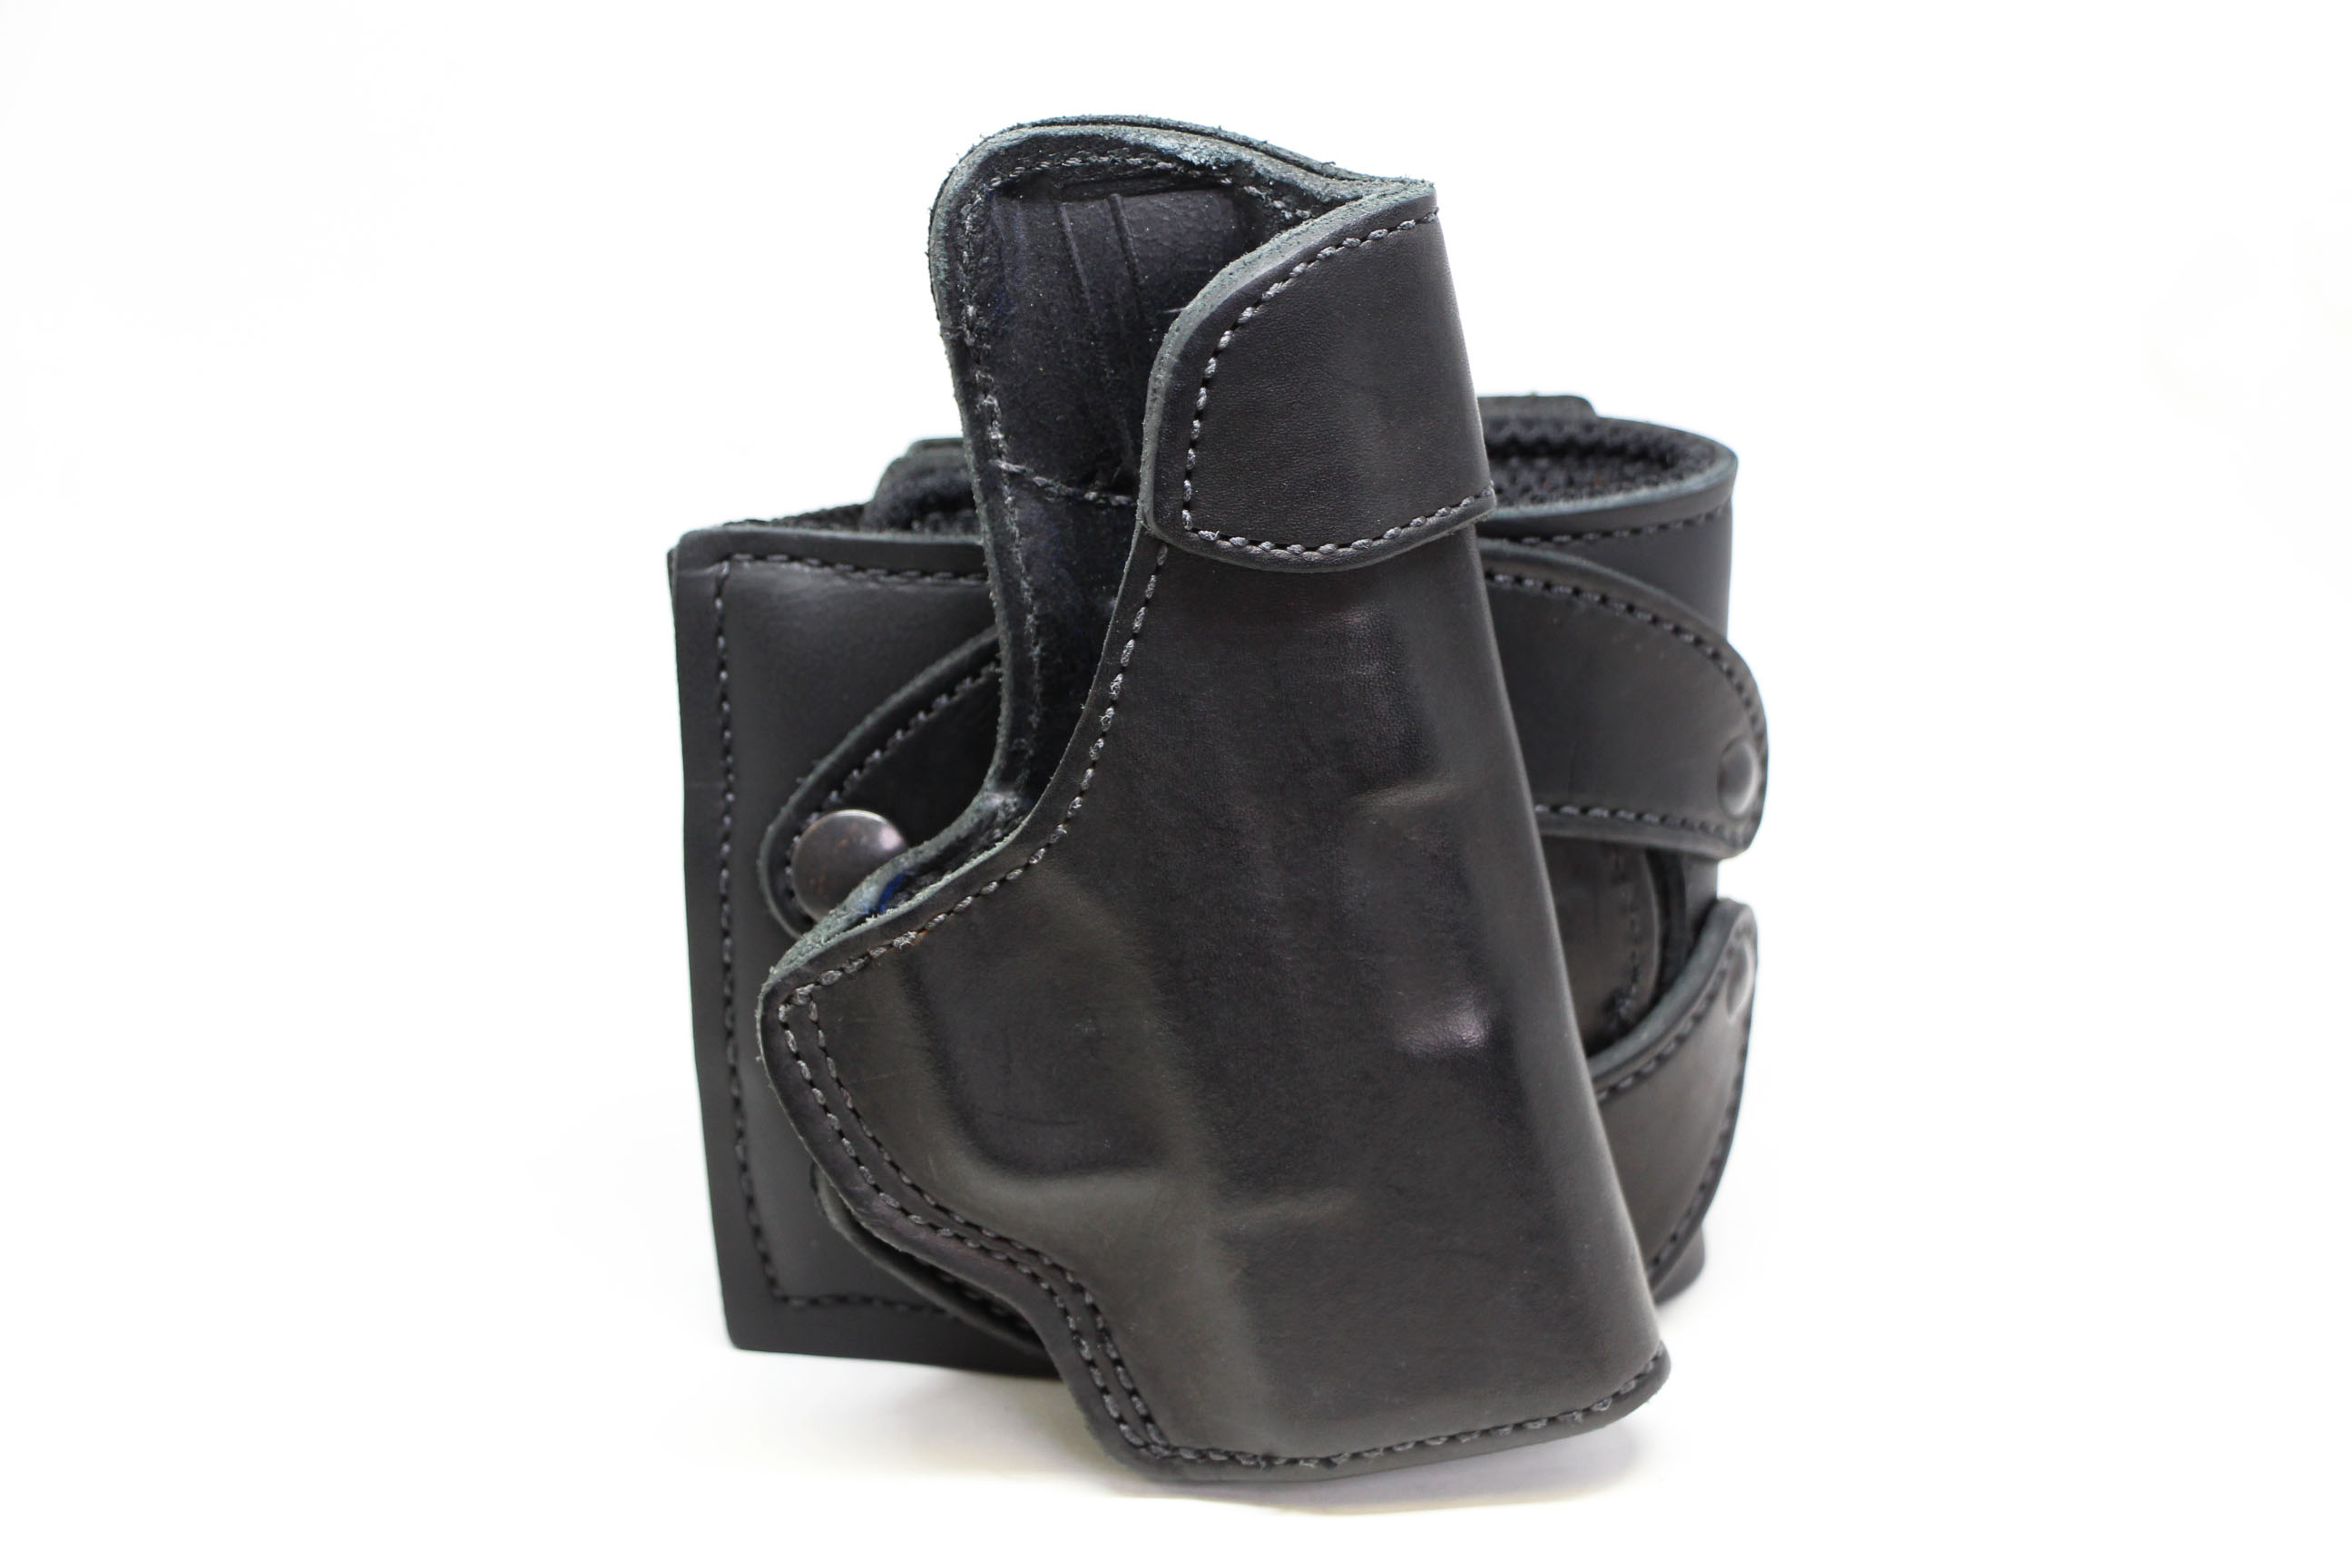 Ankle Gun Holster Fits Smith & Wesson M&P Shield